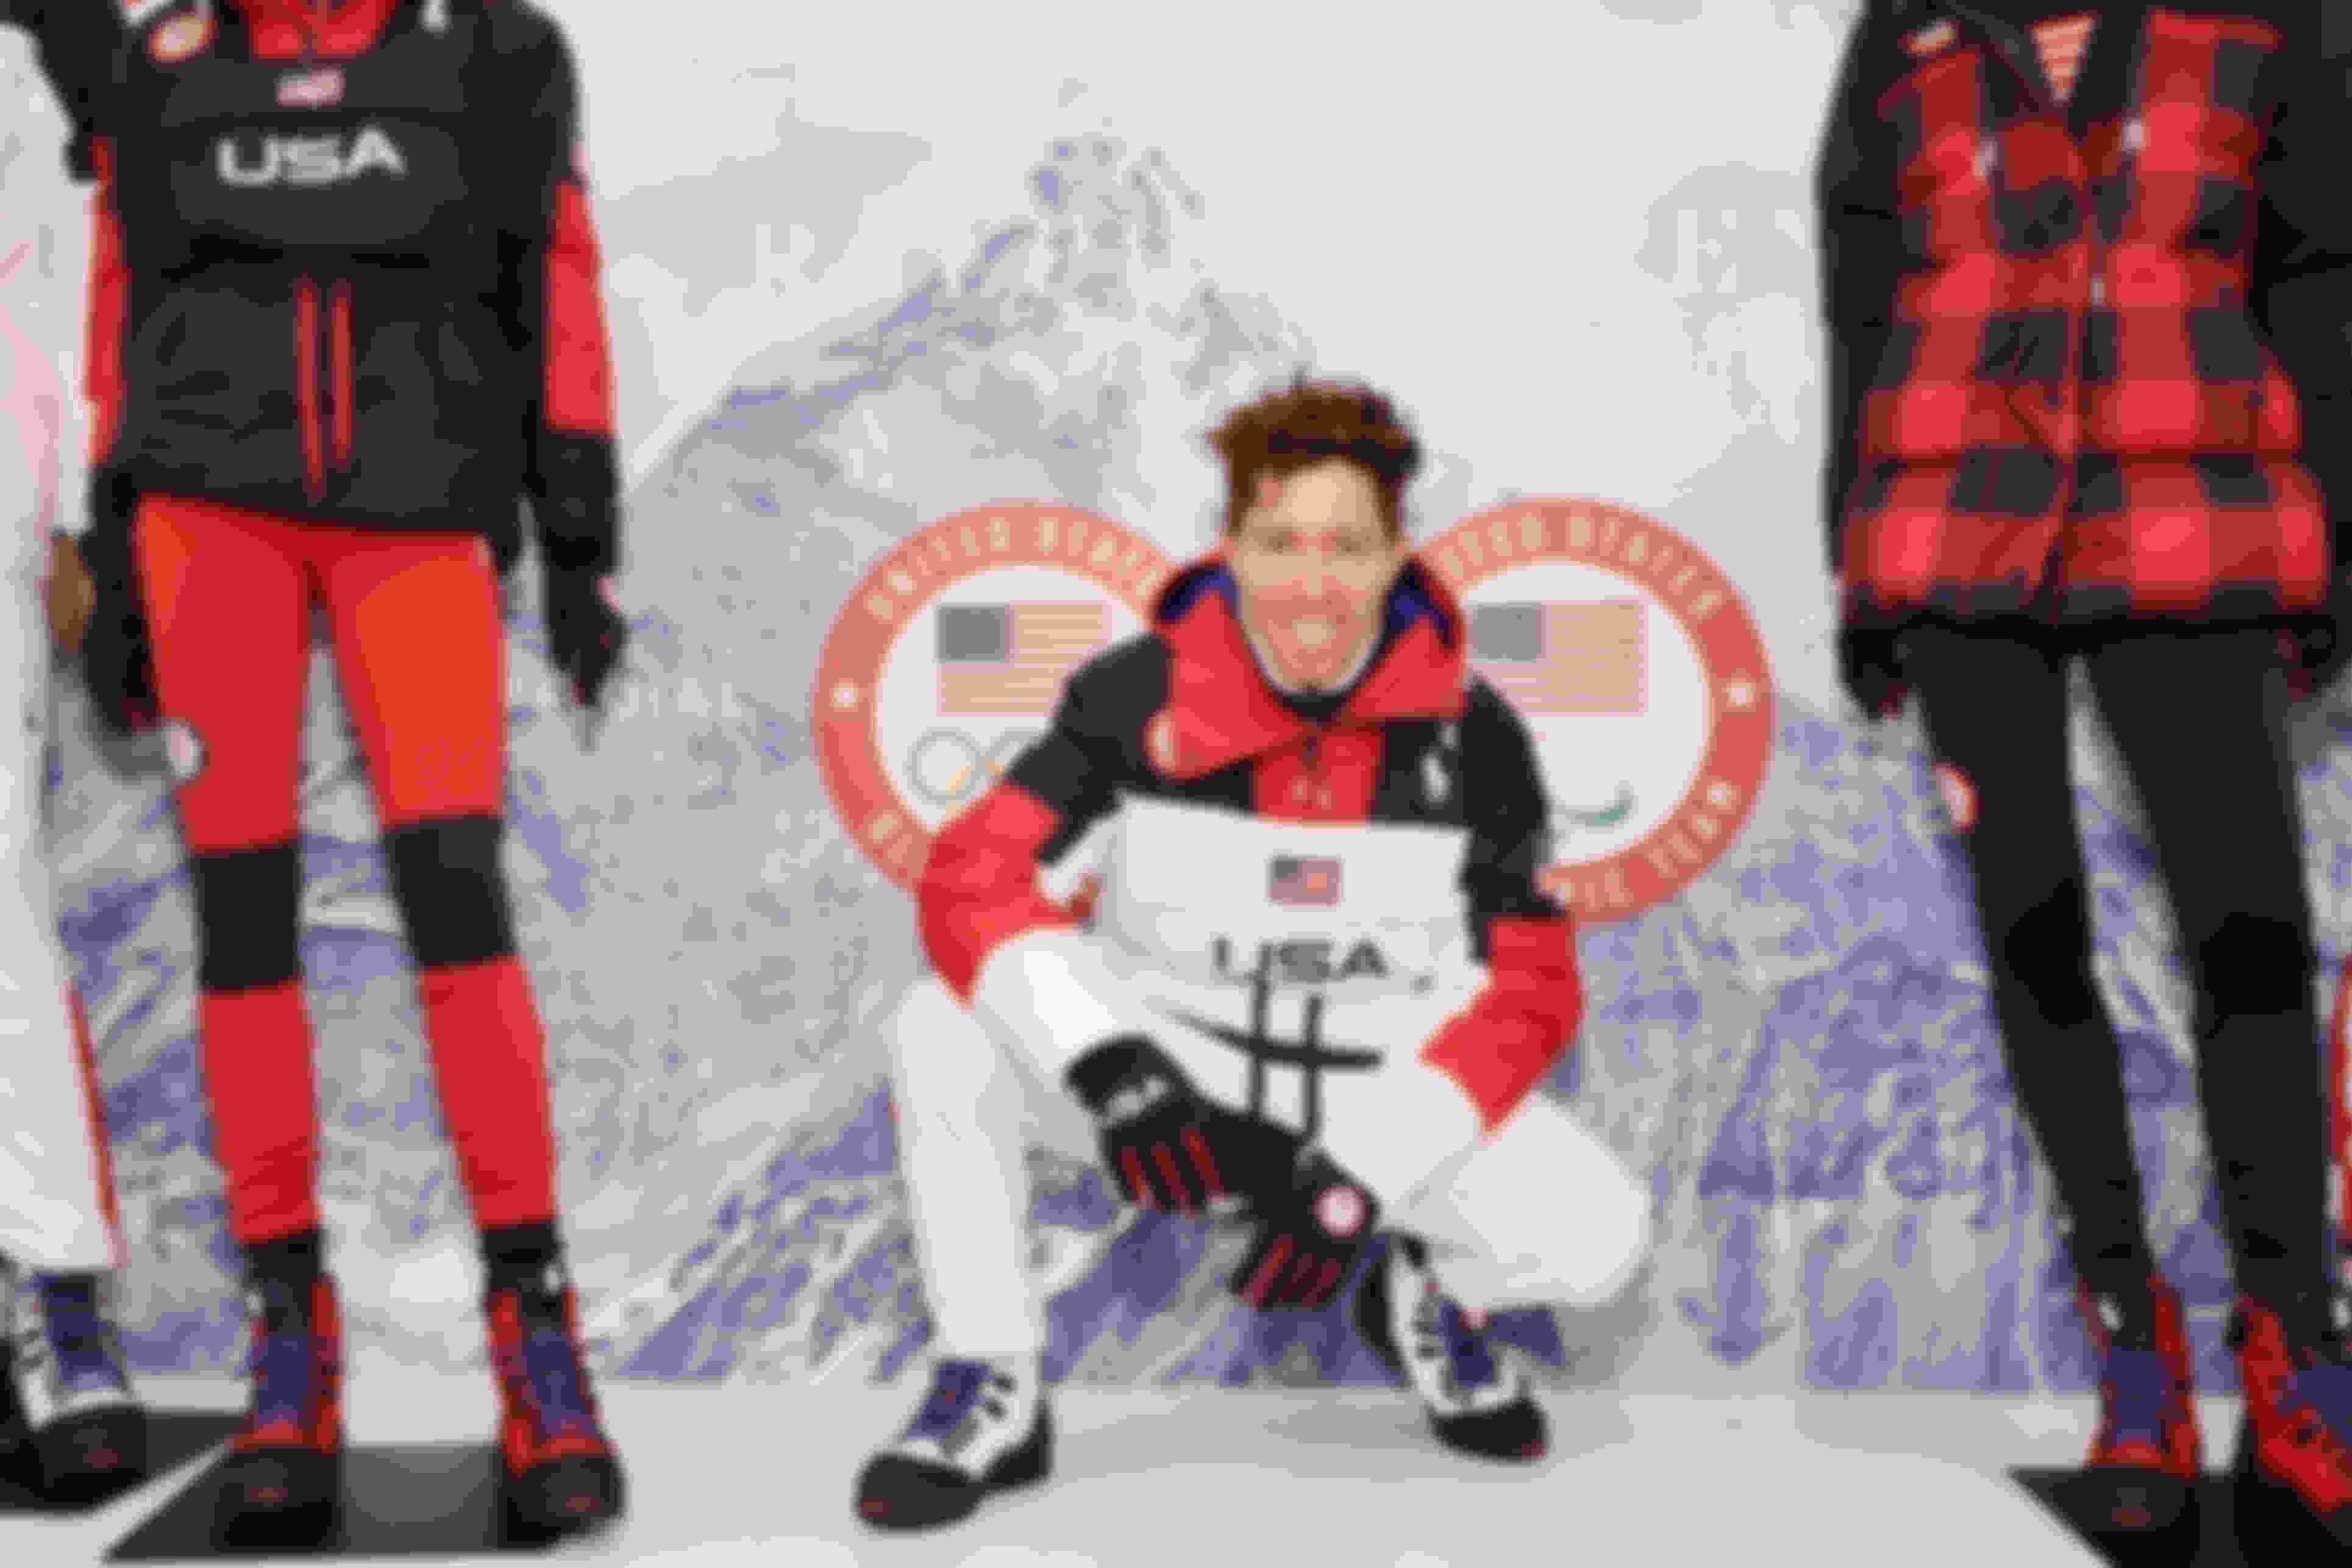 Snowboard star Shaun White poses with the Olympic Team USA uniform.